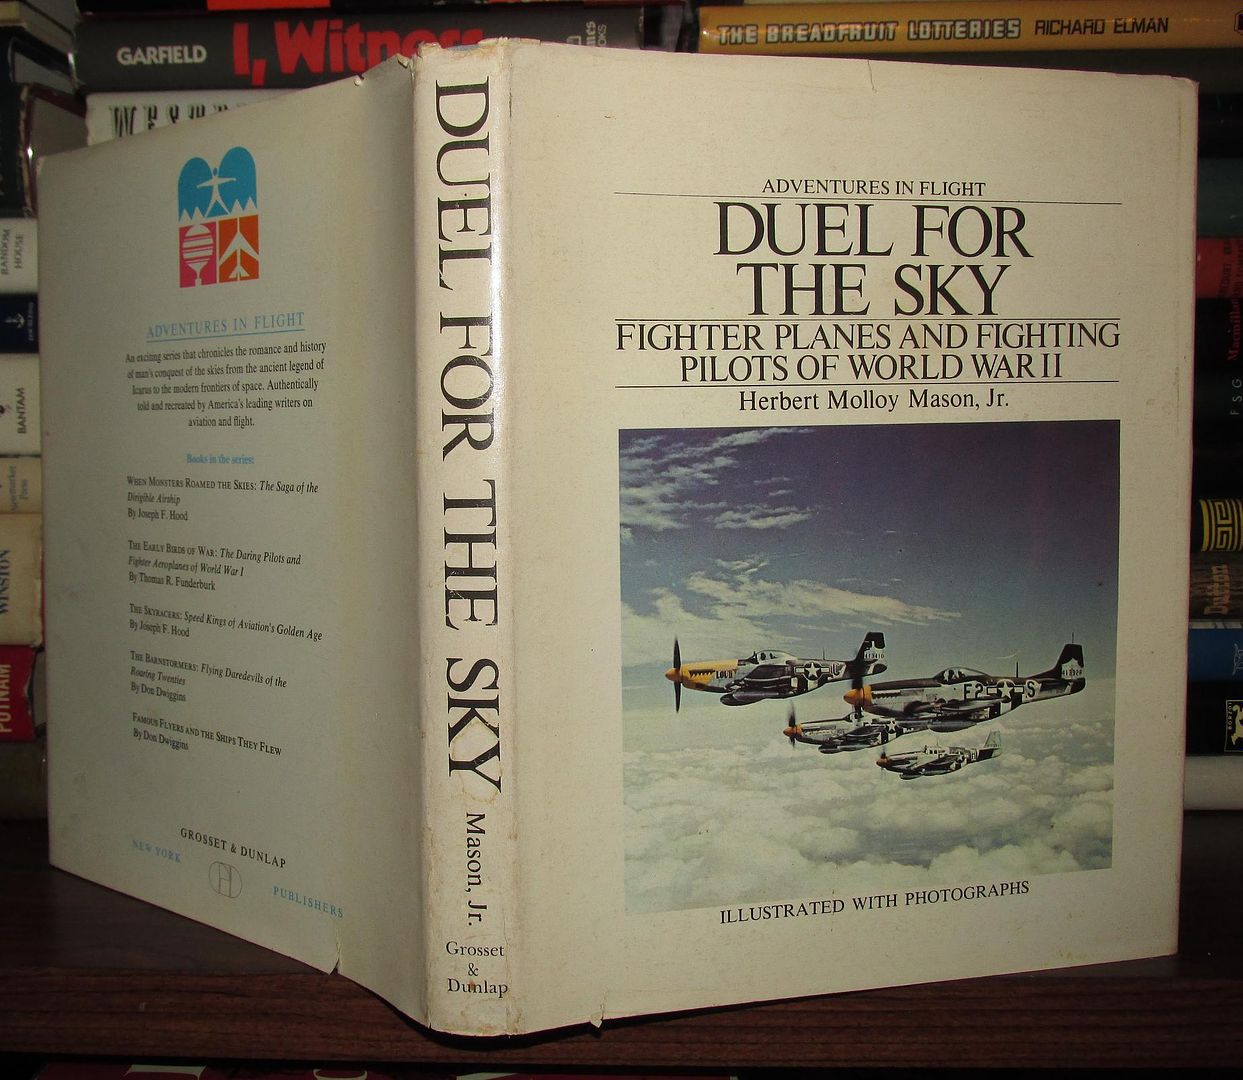 MASON, HERBERT M. - Duel for the Sky Fighter Planes and Fighting Pilots of World War II